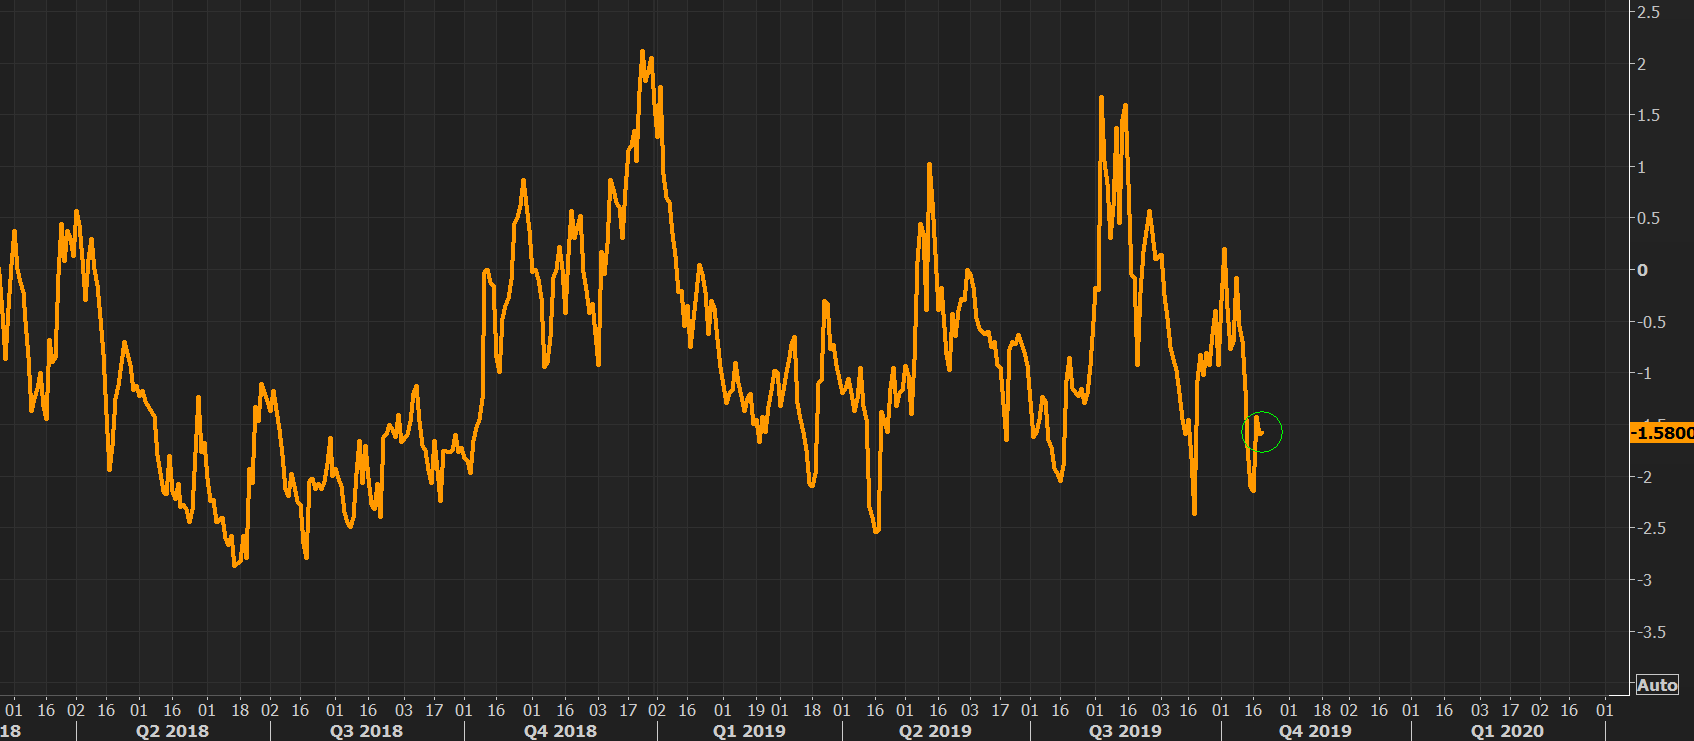 VIX futures spread holding "calm" levels as demand for short term protection fades